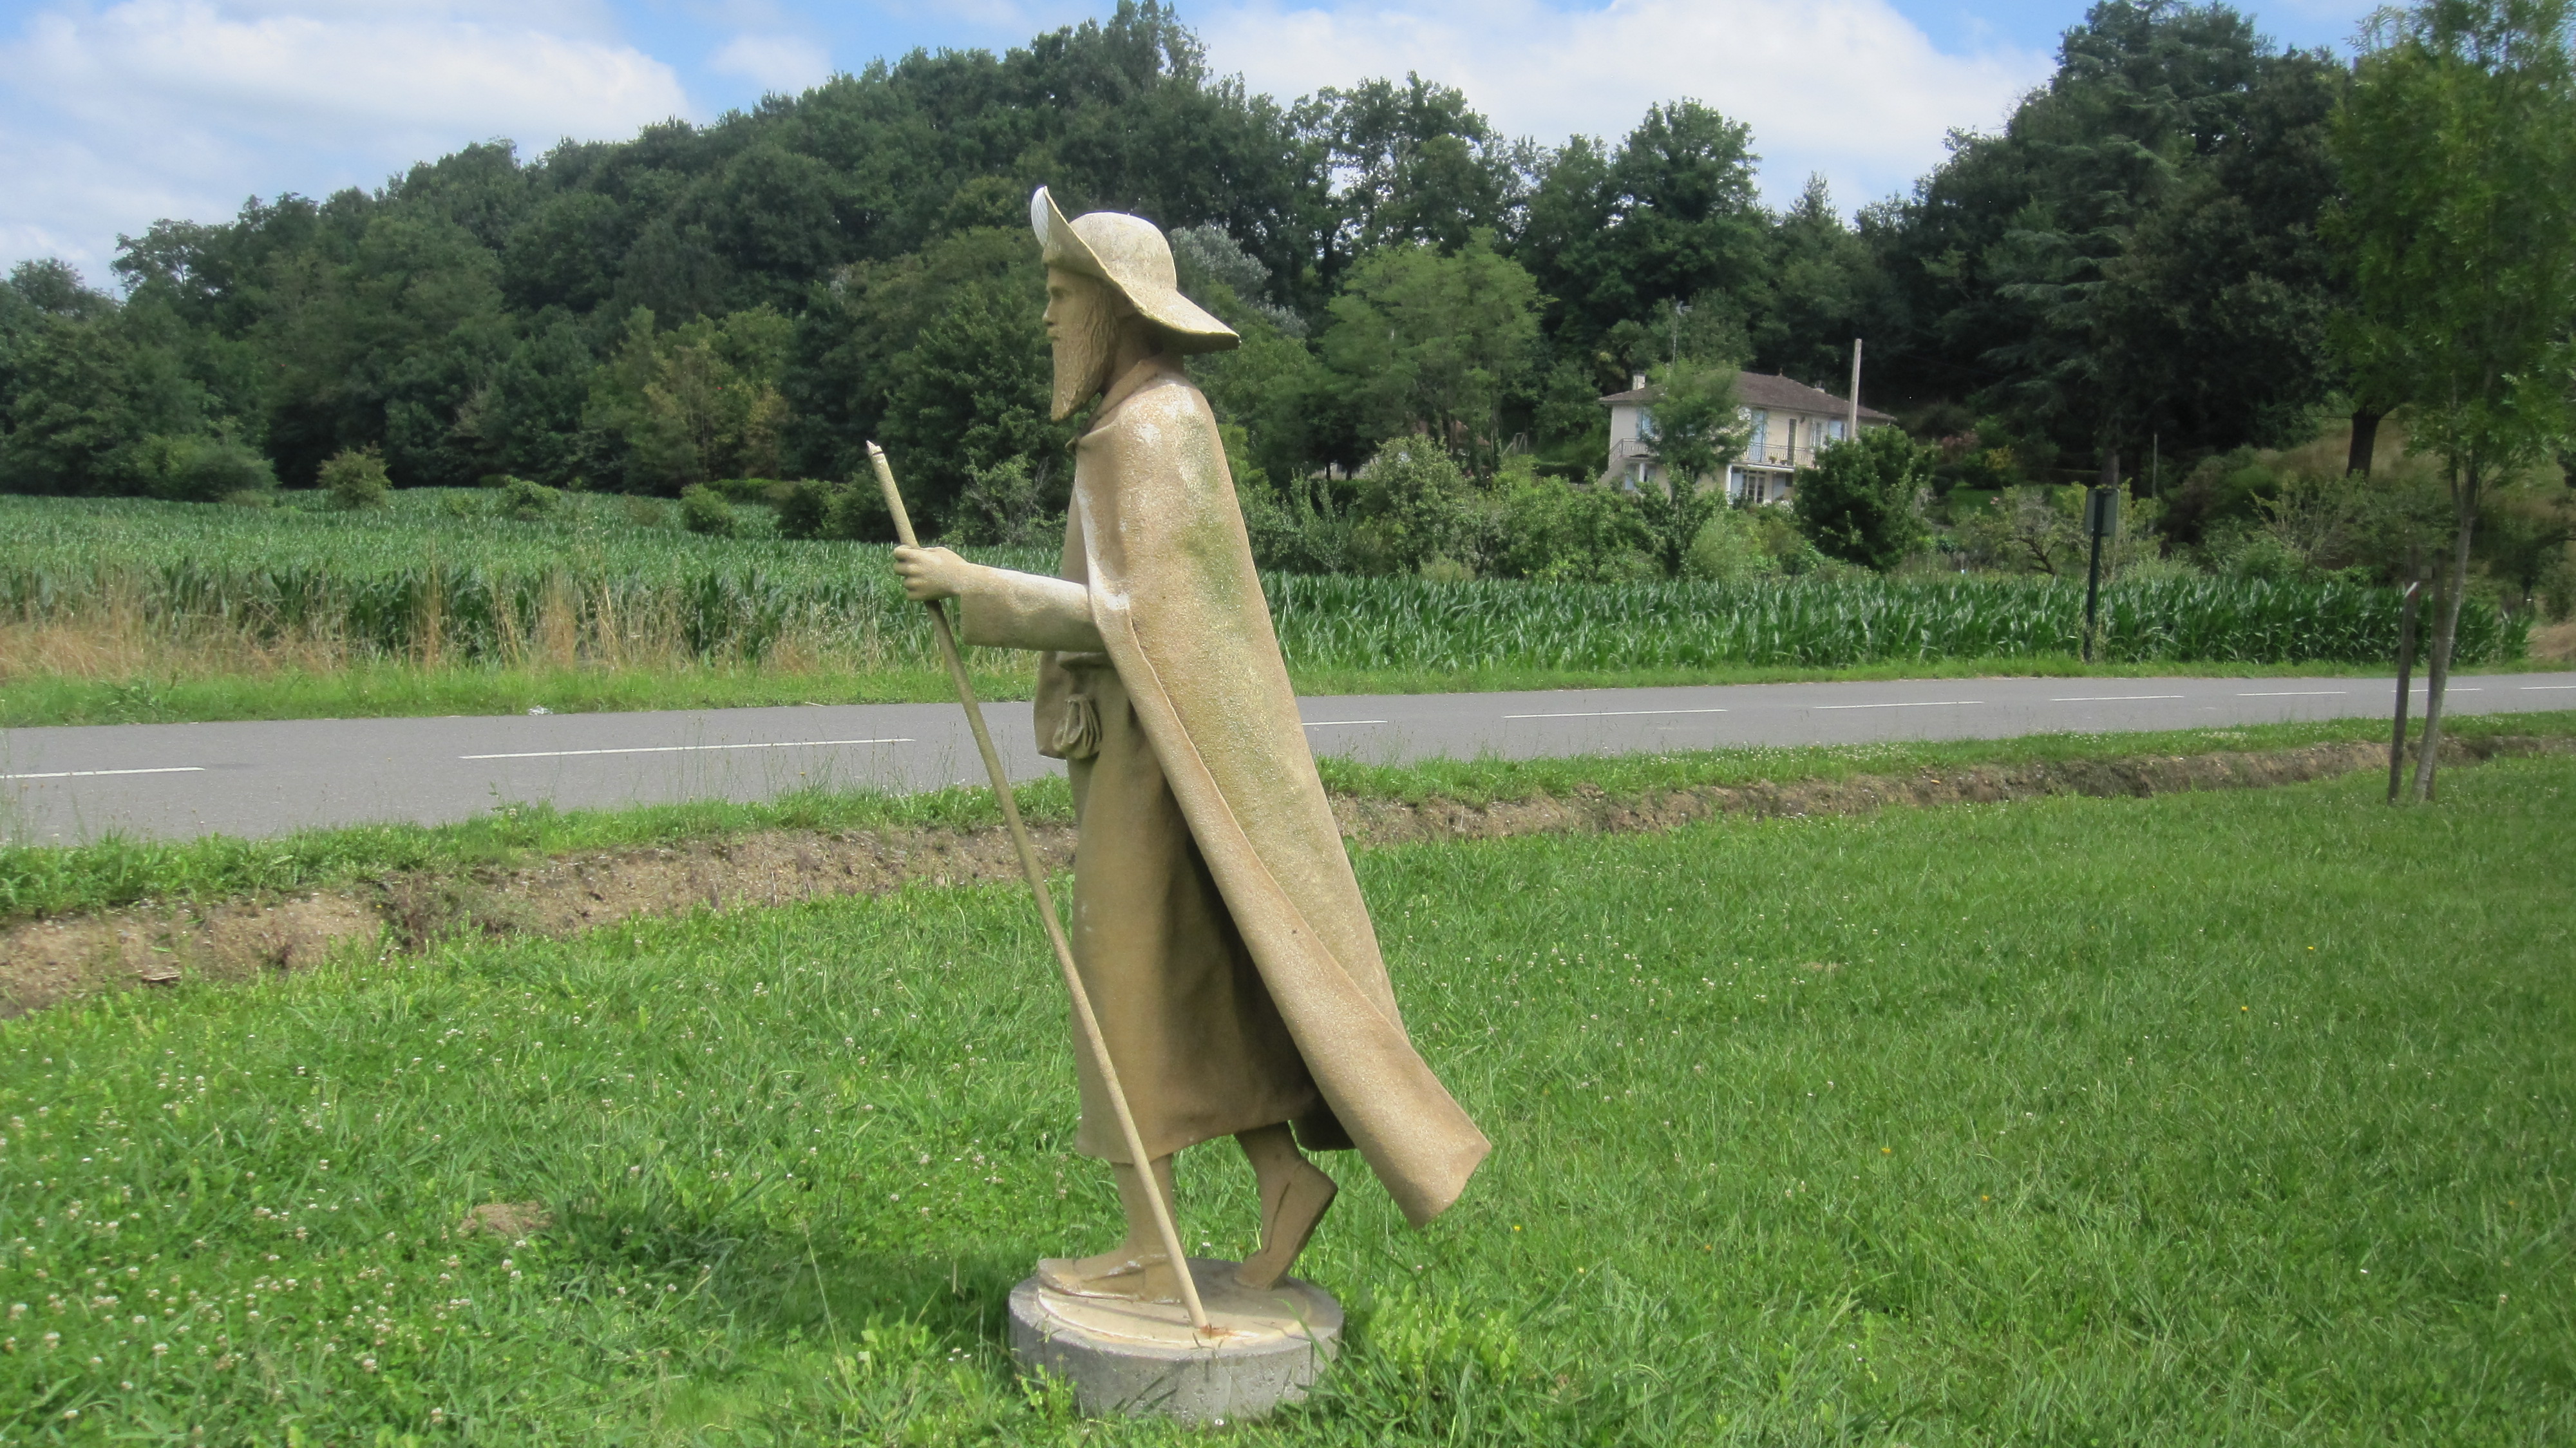 Statue of a pilgrim with staff, shell and the typical pilgrim’s hat